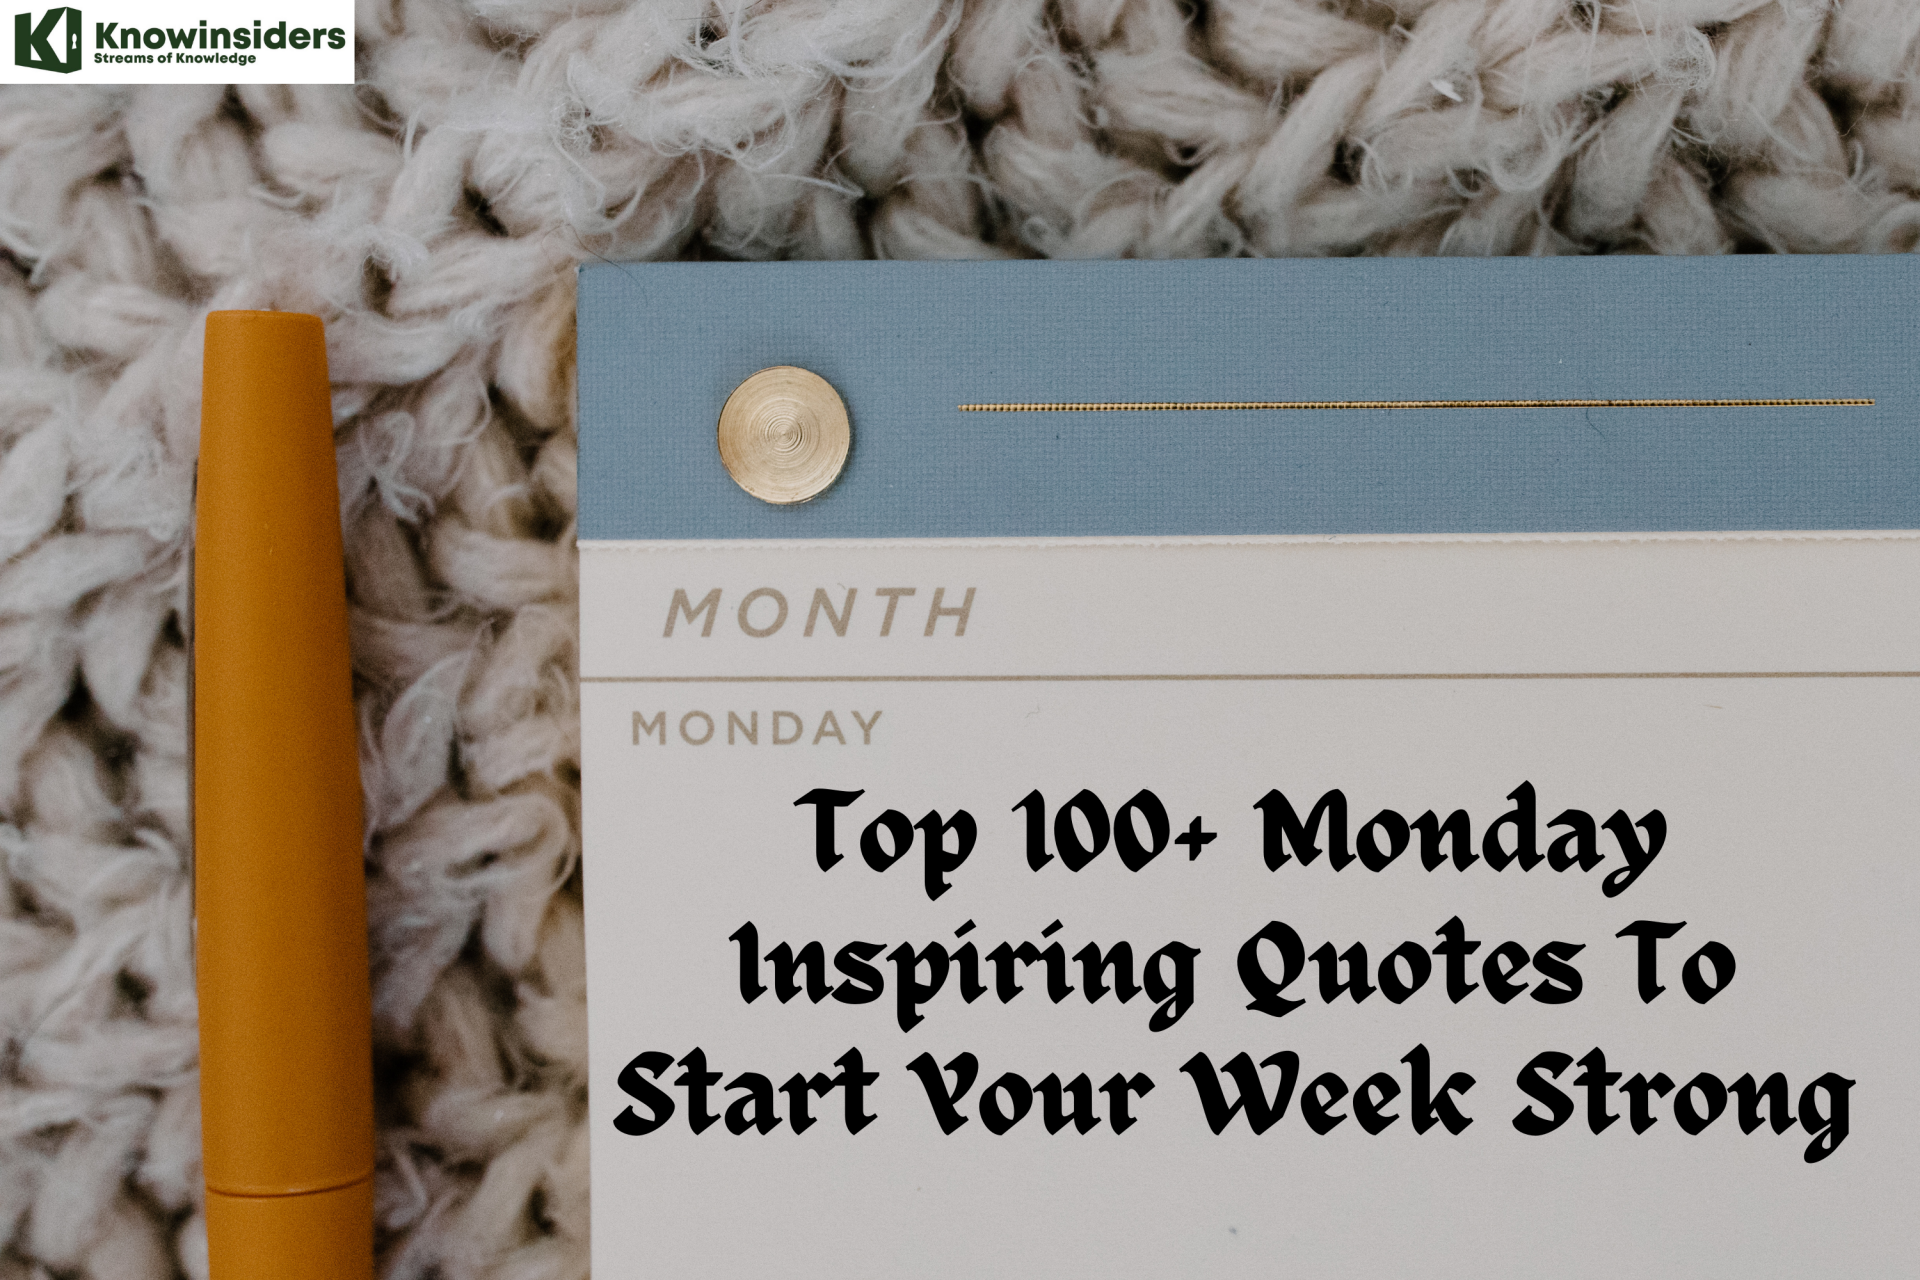 Top 100+ Monday Inspiring Quotes To Start Your Week Strong